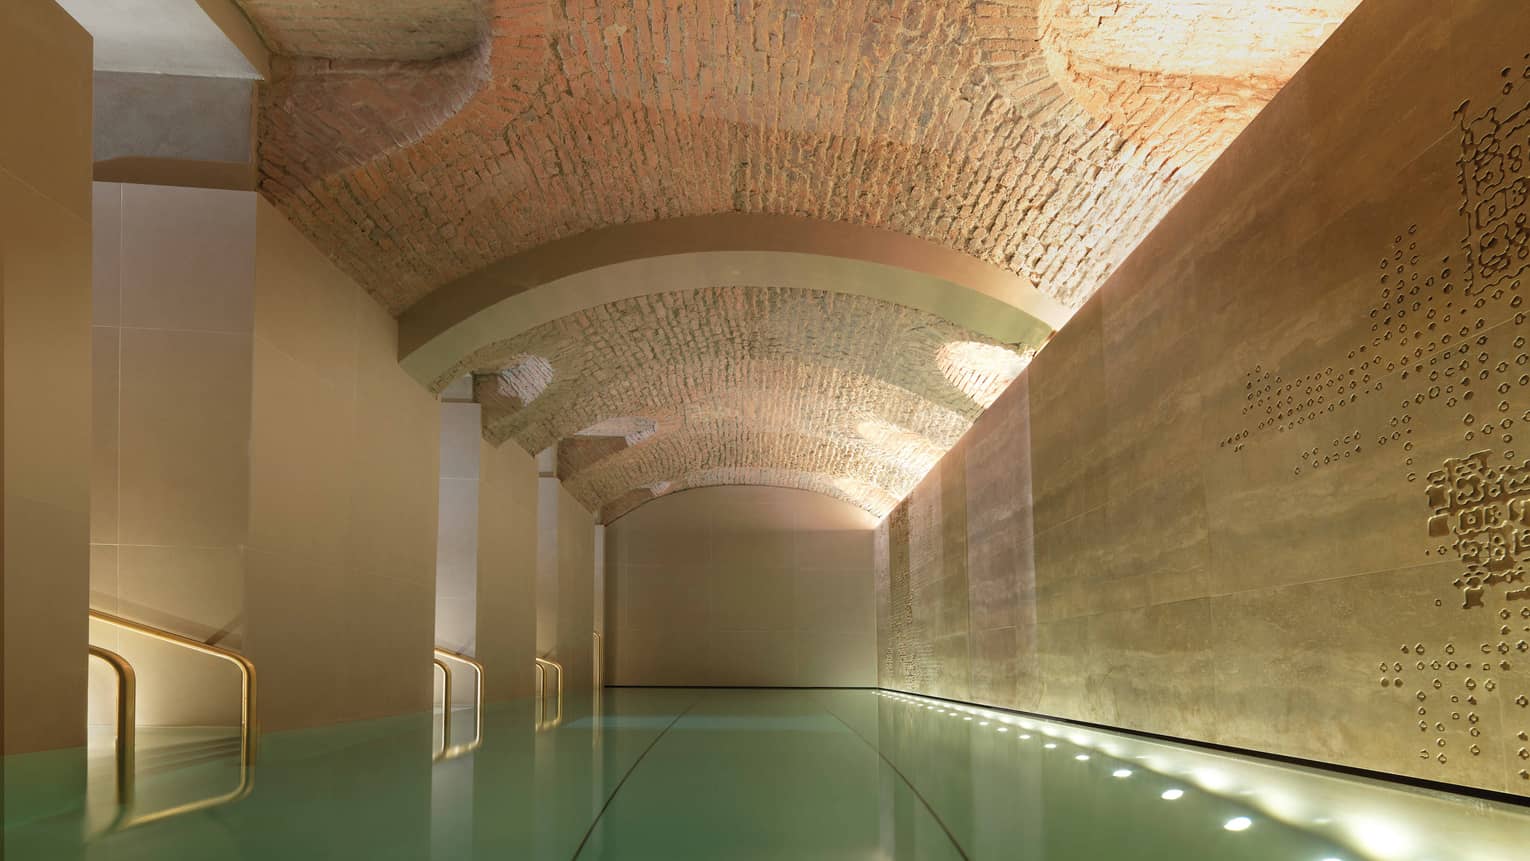 Indoor lap swimming pool with gold railings under curved stone ceiling